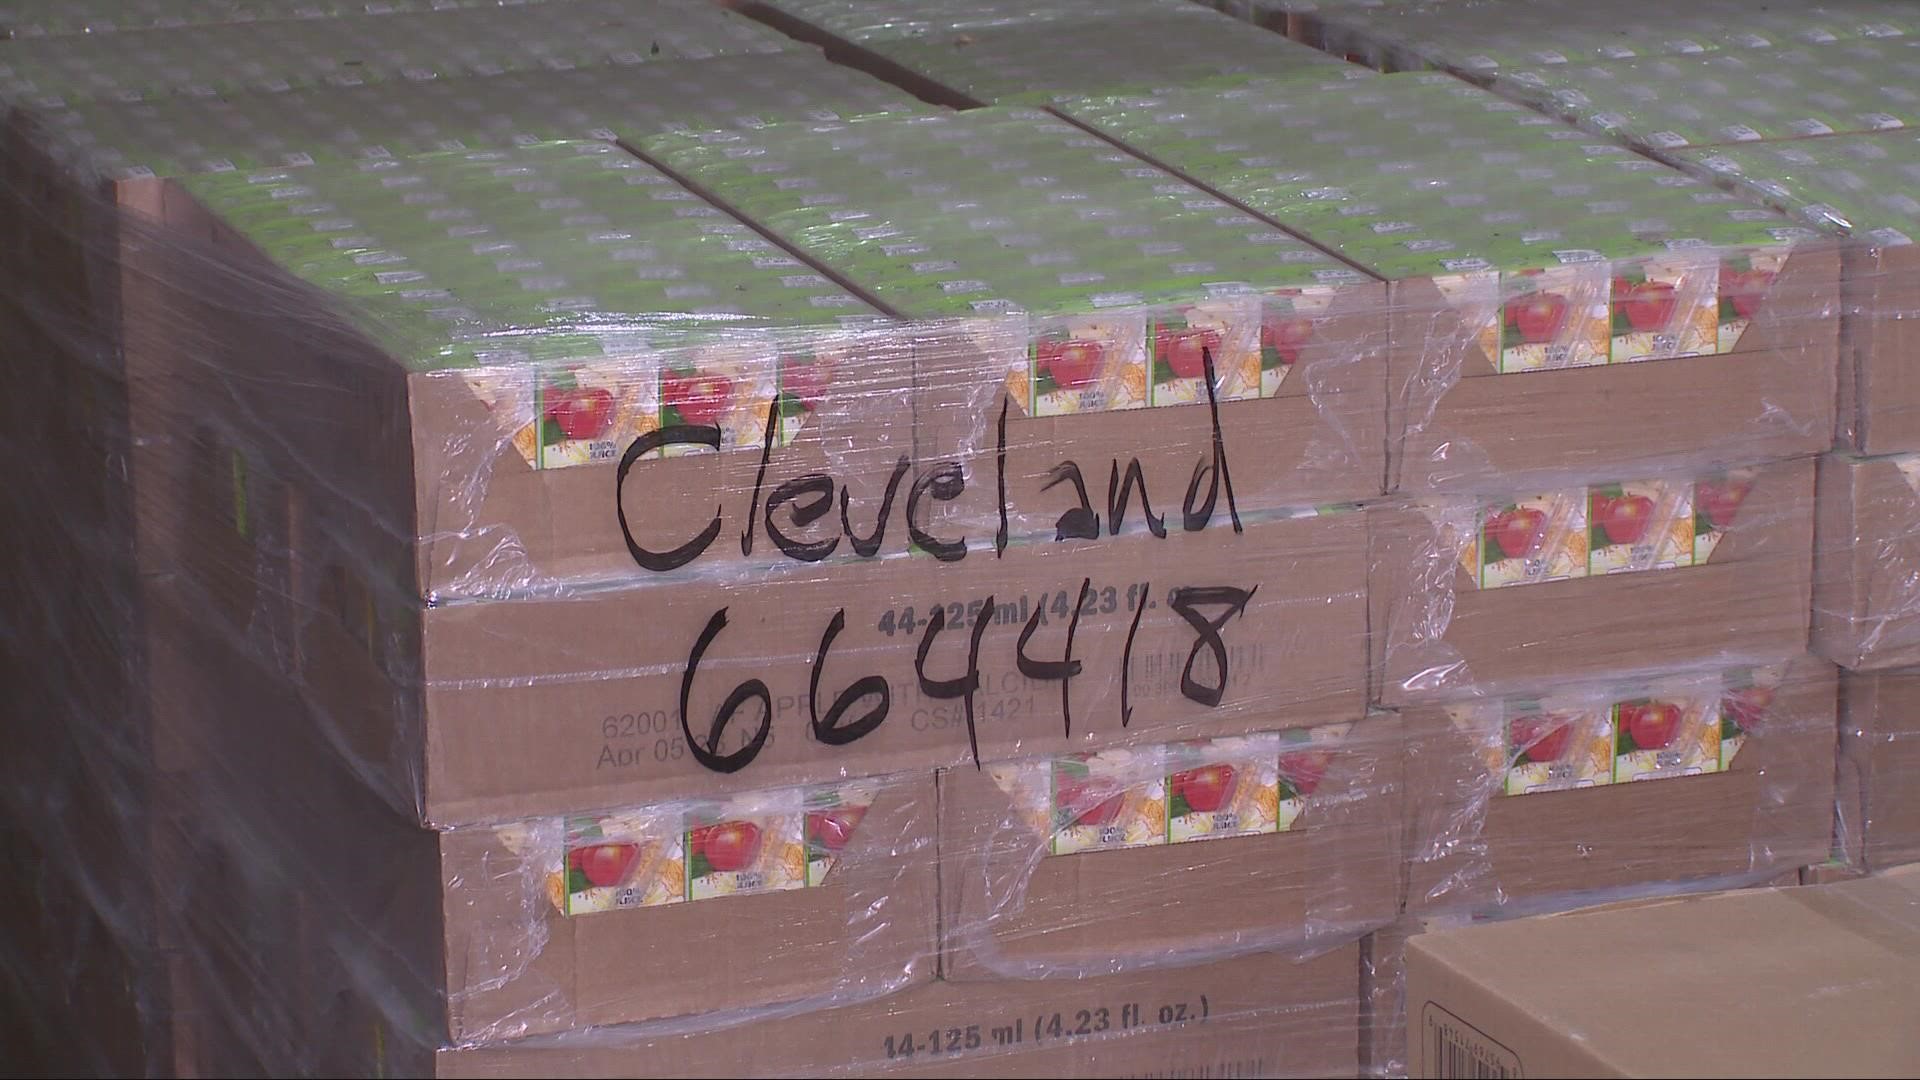 Food banks in Northeast Ohio say they are looking for more immediate relief.